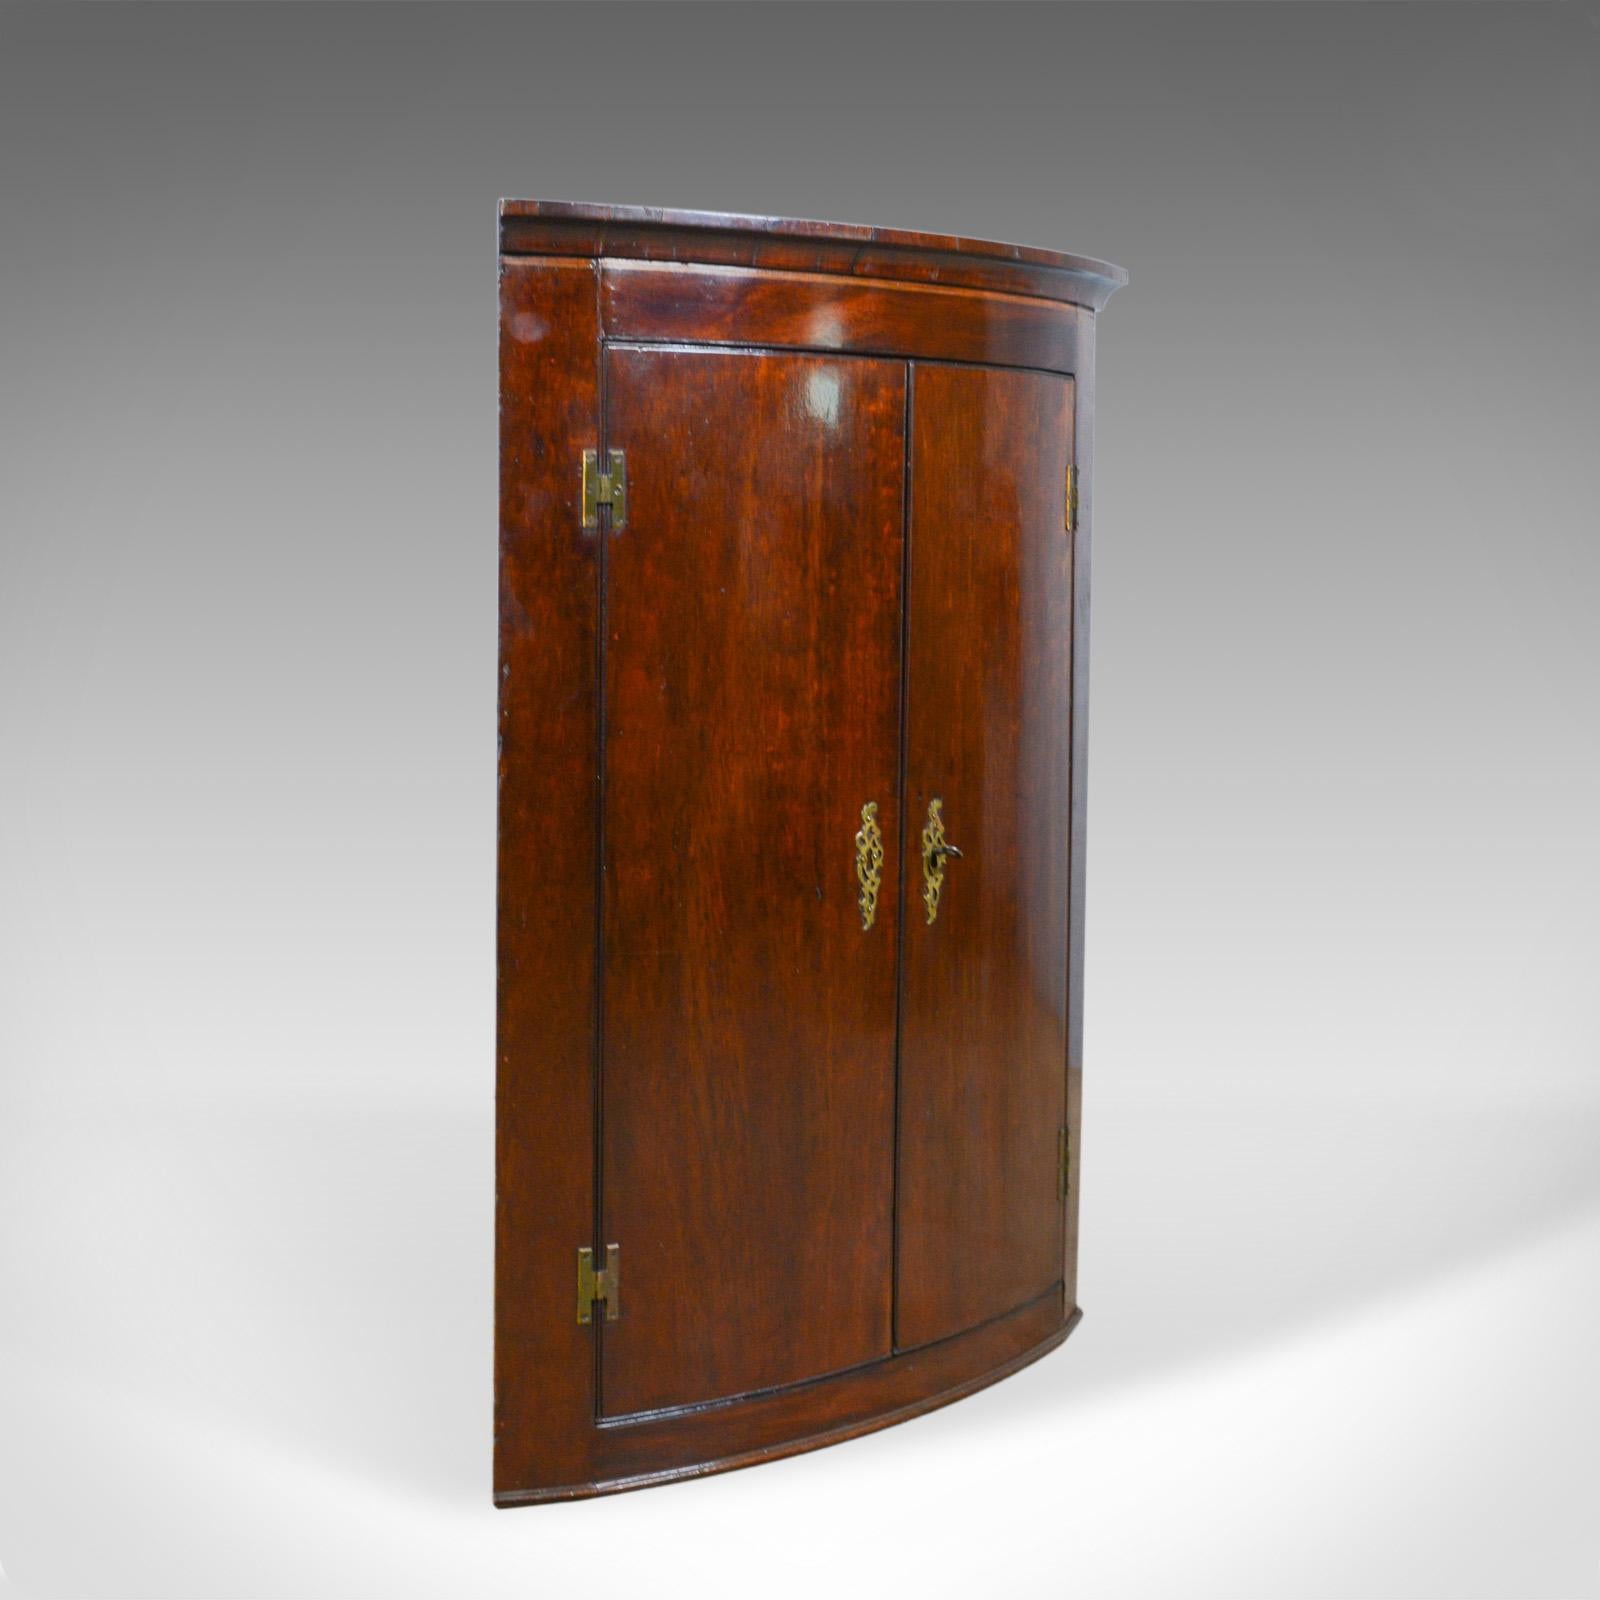 This is an antique corner cabinet. An English, late Georgian, bow fronted, mahogany, hanging corner cupboard dating to the circa 1800.

Deep and rich in color with a desirable aged patina 
Grain interest throughout in the lustrous wax polished